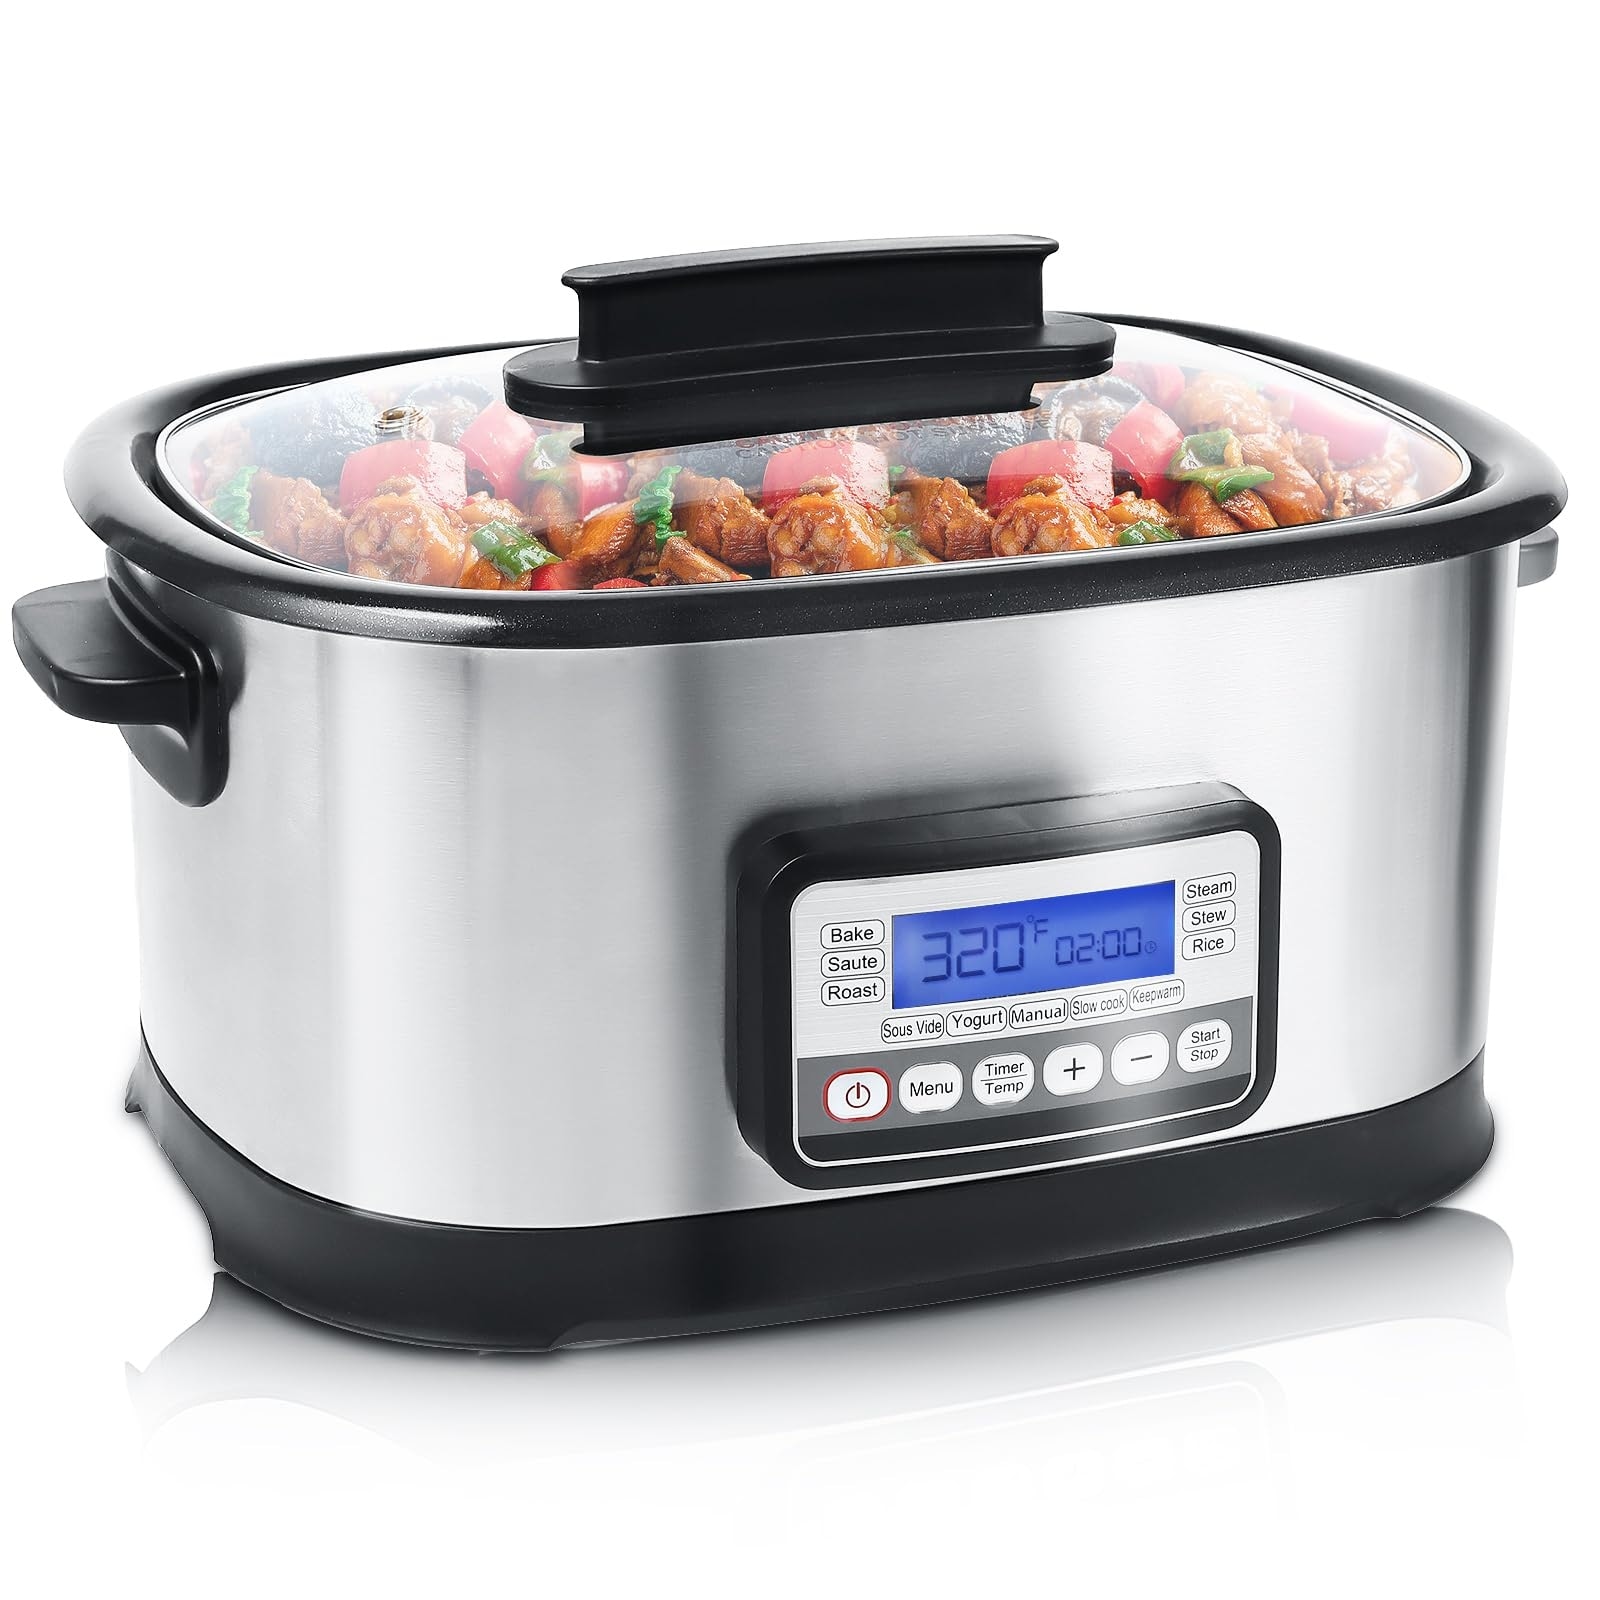 https://ak1.ostkcdn.com/images/products/is/images/direct/45ac2b931642e51f649098493835b133b9be360d/11-in-1-Slow-Cooker-Programmable-6.5-Quart-1500W-Nonstick-Inner-Pot-with-Timer%2C-Temp-Control-%26-Dishwasher-Safe-Glass-Lid.jpg